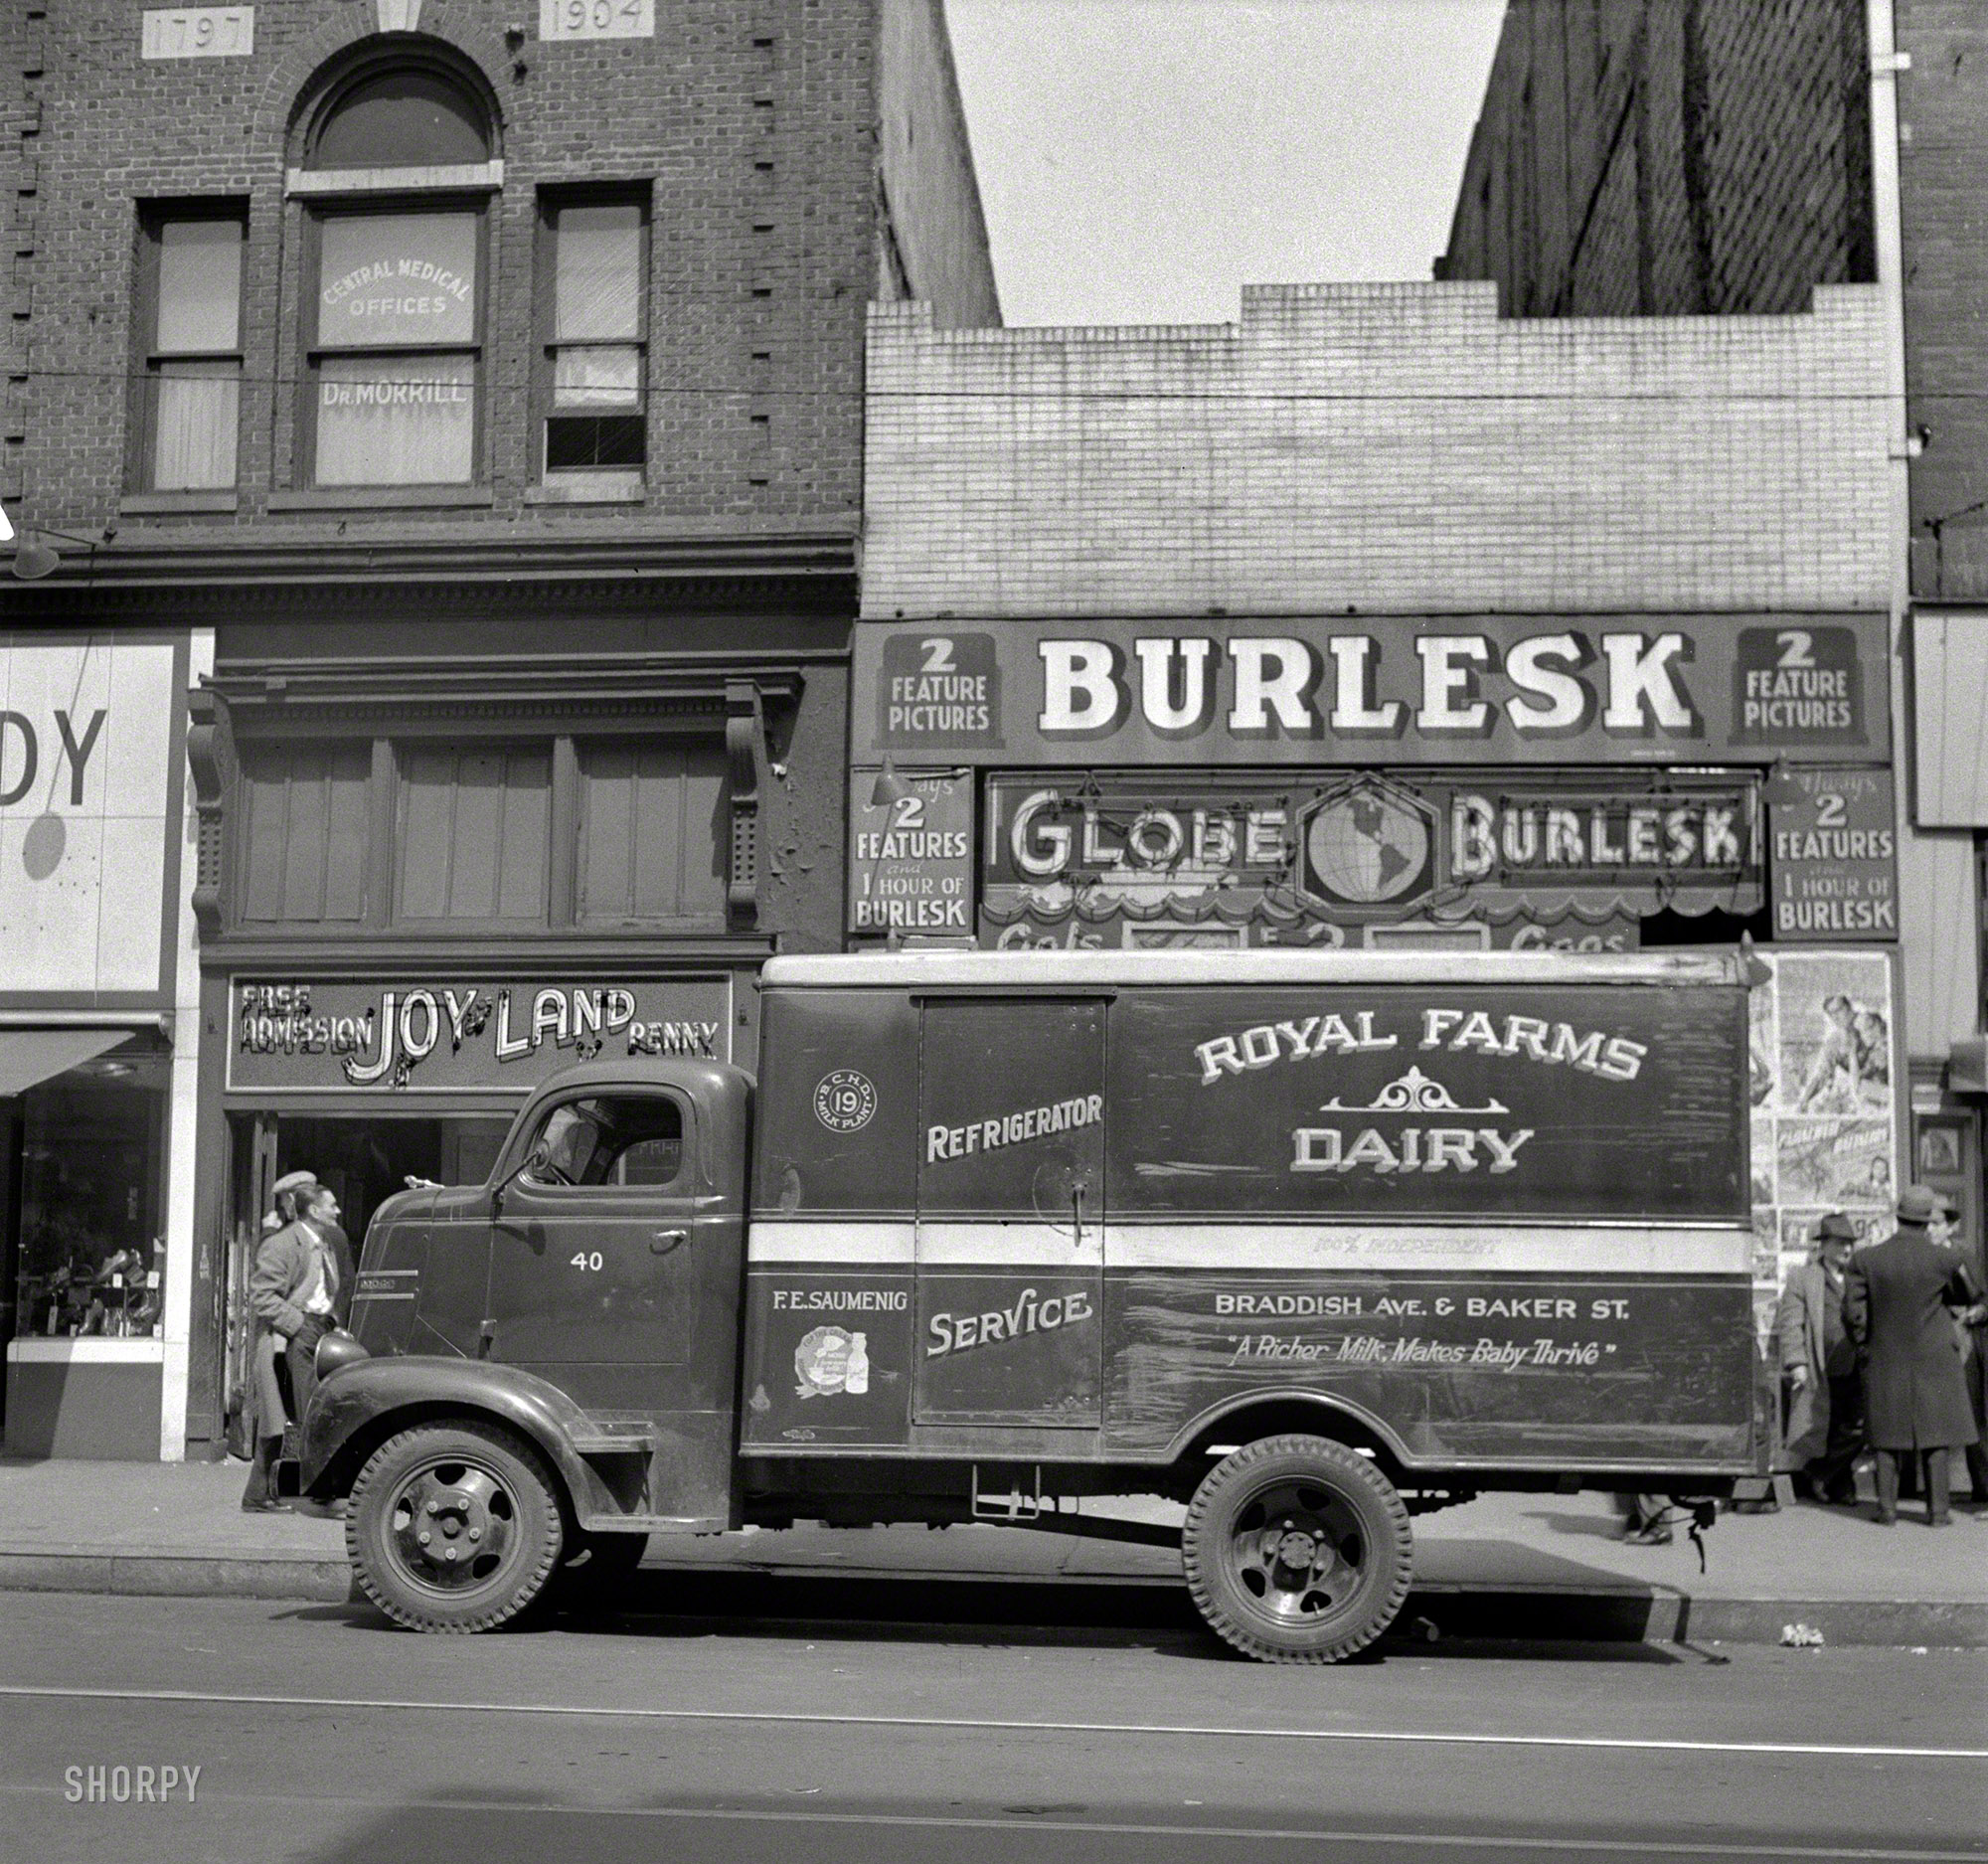 April 1943. "Baltimore, Maryland -- a street scene. Light Street." Photo by Marjory Collins for the Office of War Information. View full size.